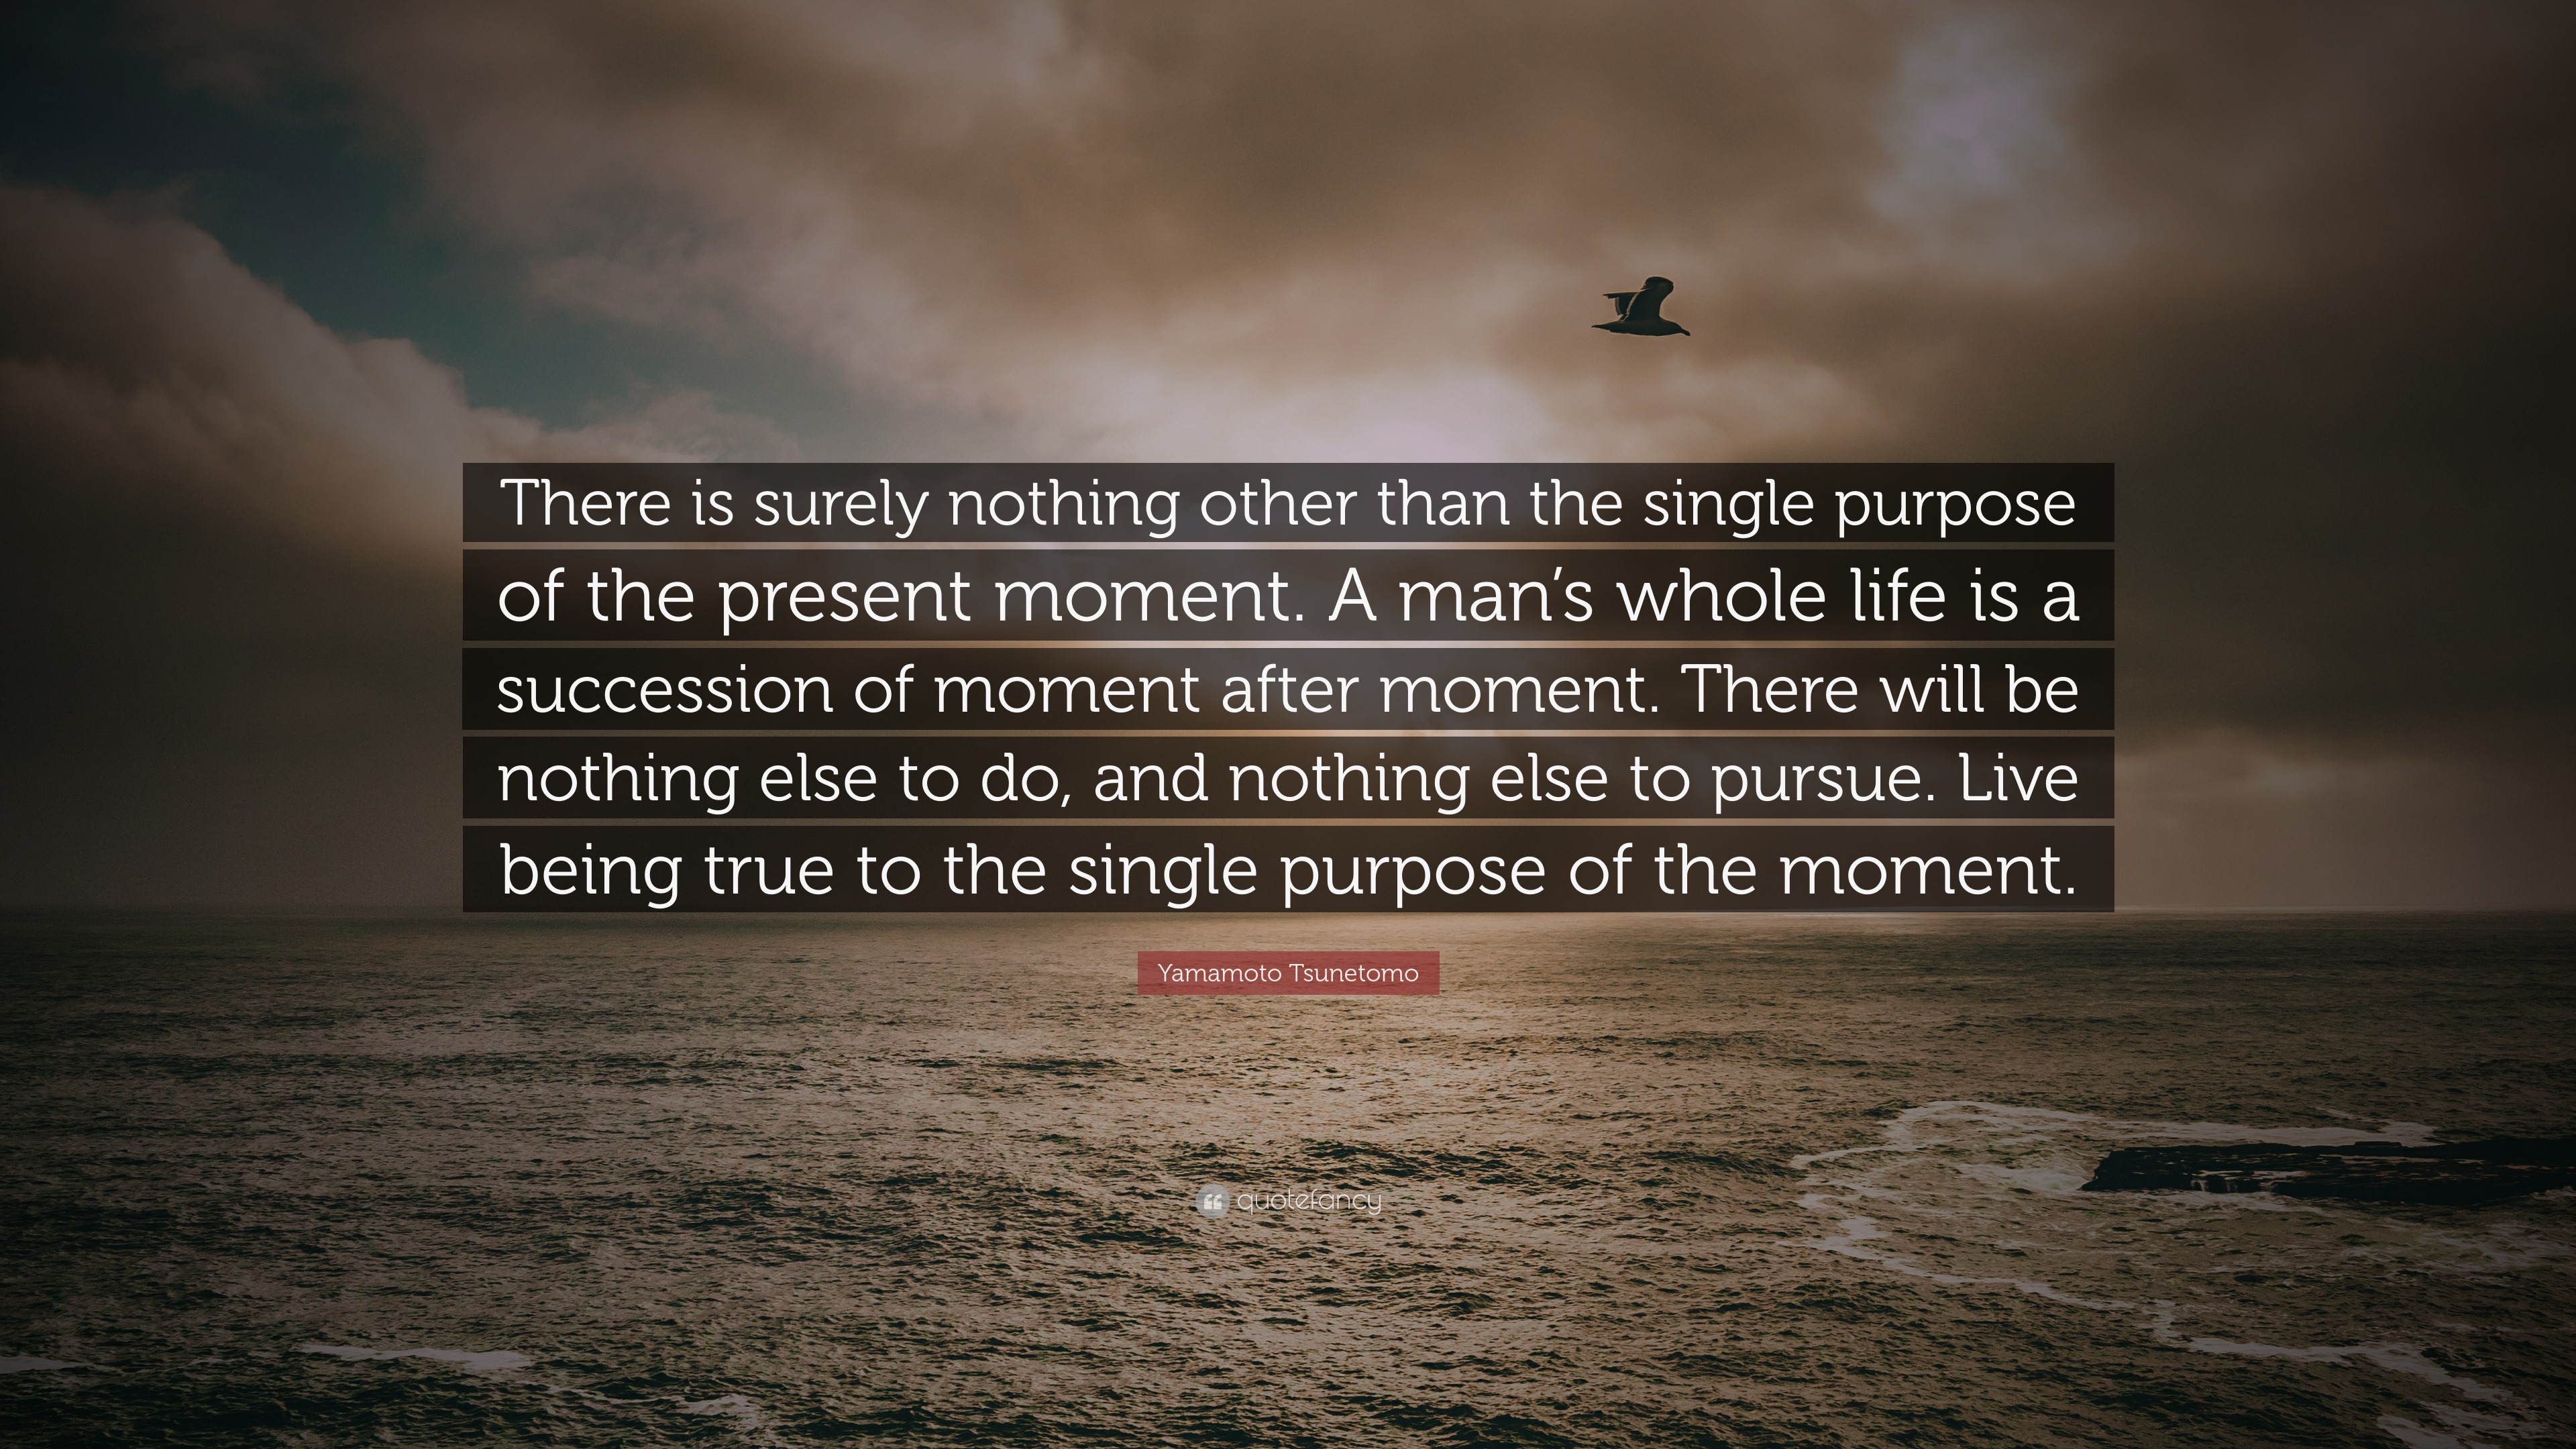 Living in the Actual Moment - The Present Moment